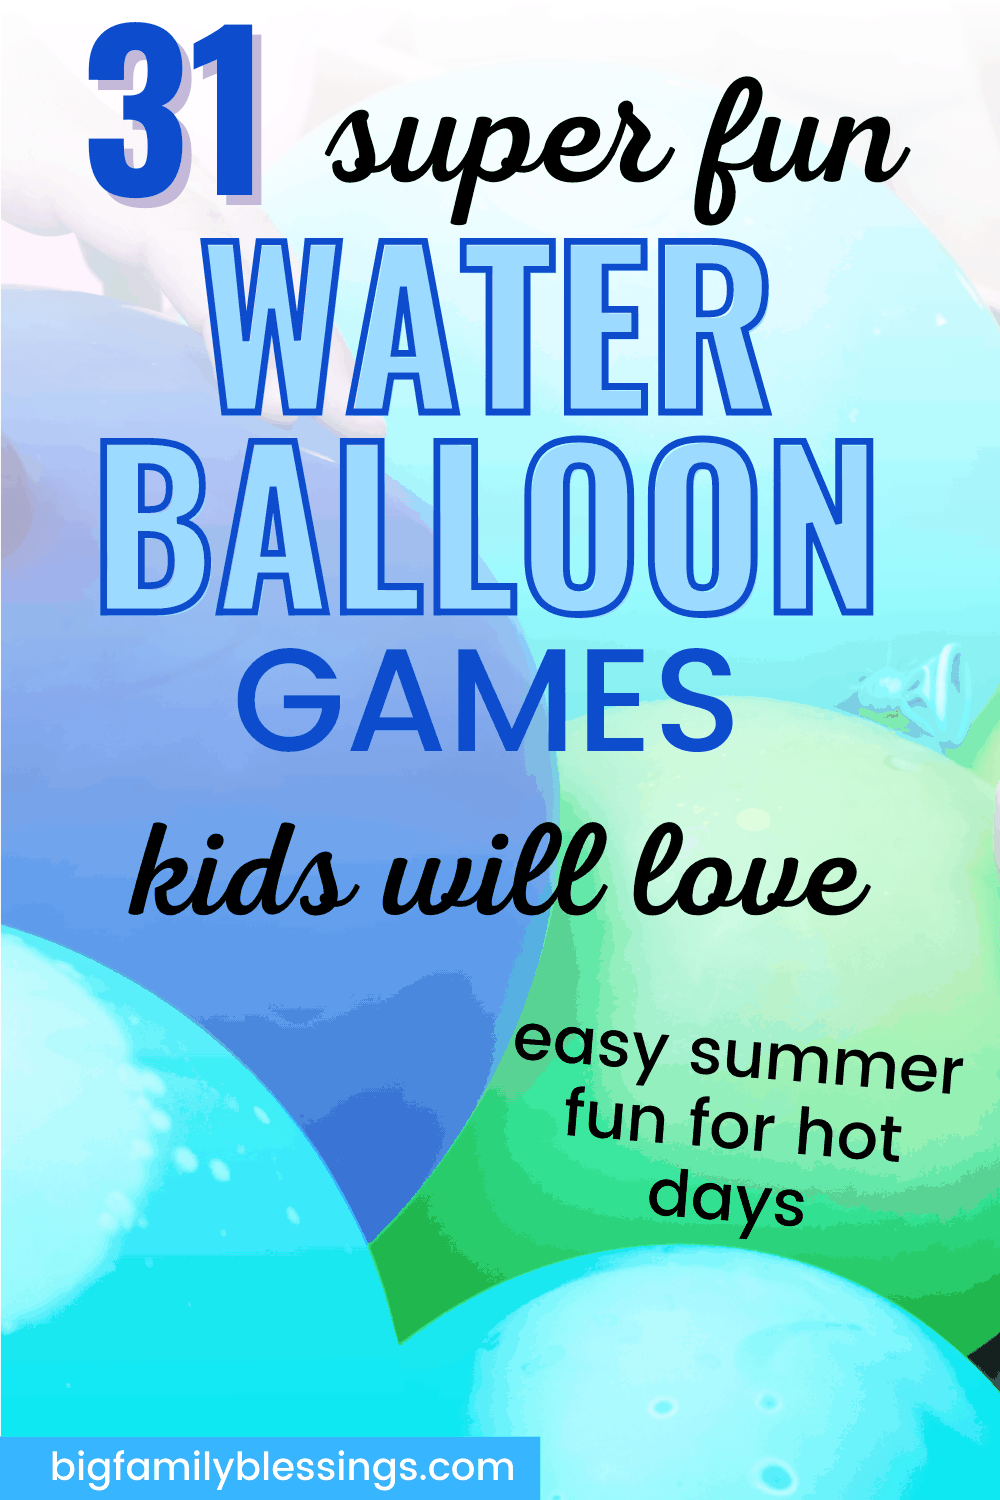 Water Balloons for Kids Girls Boys Balloons Set Party Games Quick Fill Water Balloons 444 Bunches Swimming Pool Outdoor Summer Fun L10 